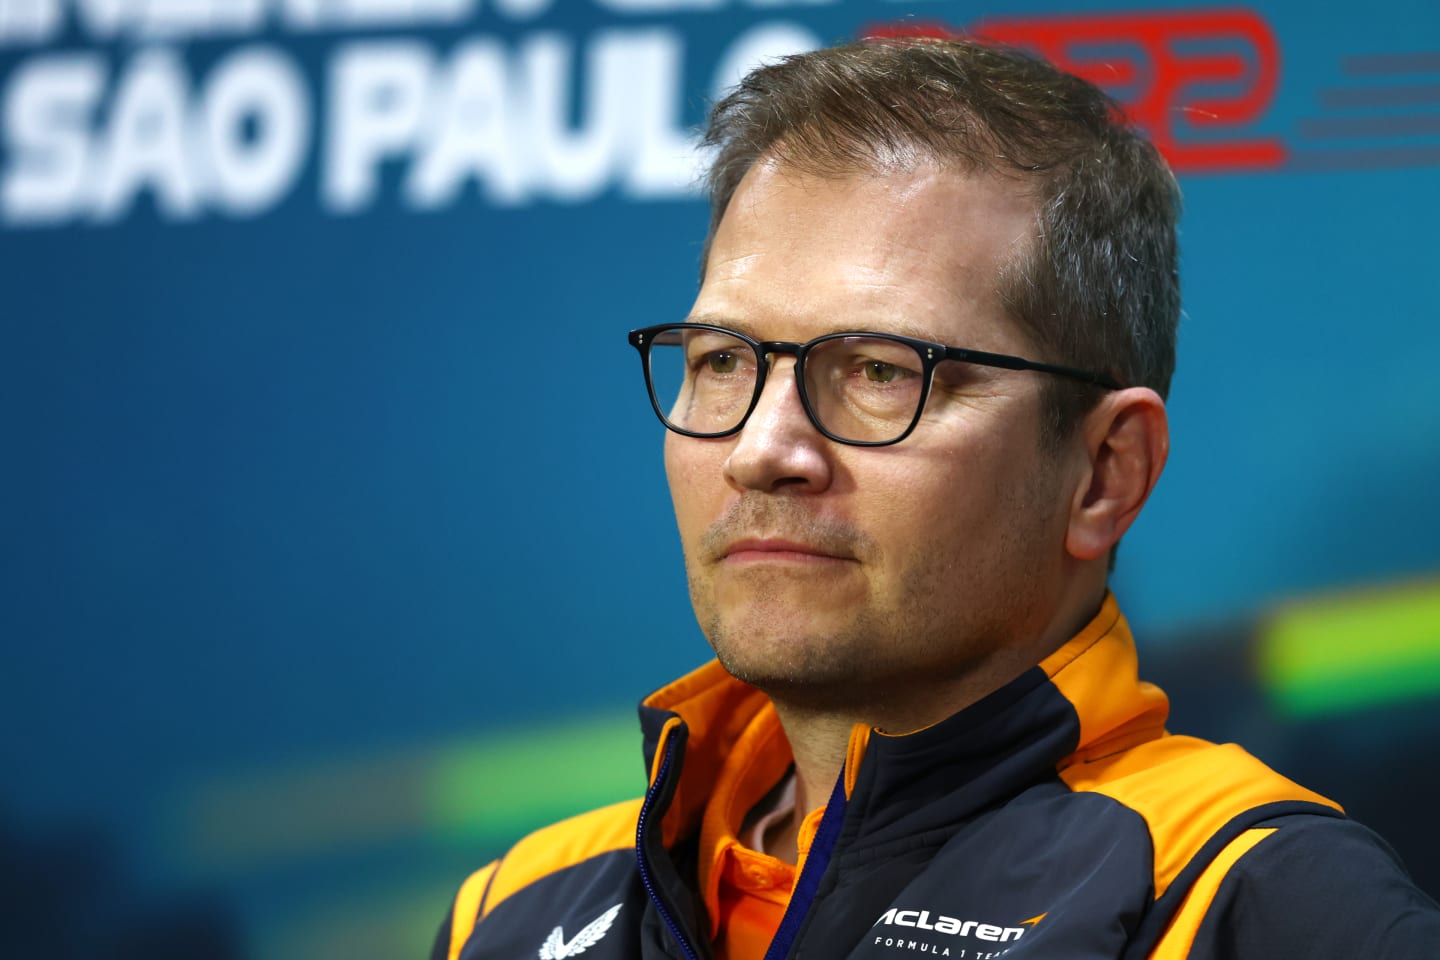 SAO PAULO, BRAZIL - NOVEMBER 12: McLaren Team Principal Andreas Seidl attends a press conference prior to practice ahead of the F1 Grand Prix of Brazil at Autodromo Jose Carlos Pace on November 12, 2022 in Sao Paulo, Brazil. (Photo by Bryn Lennon/Getty Images)